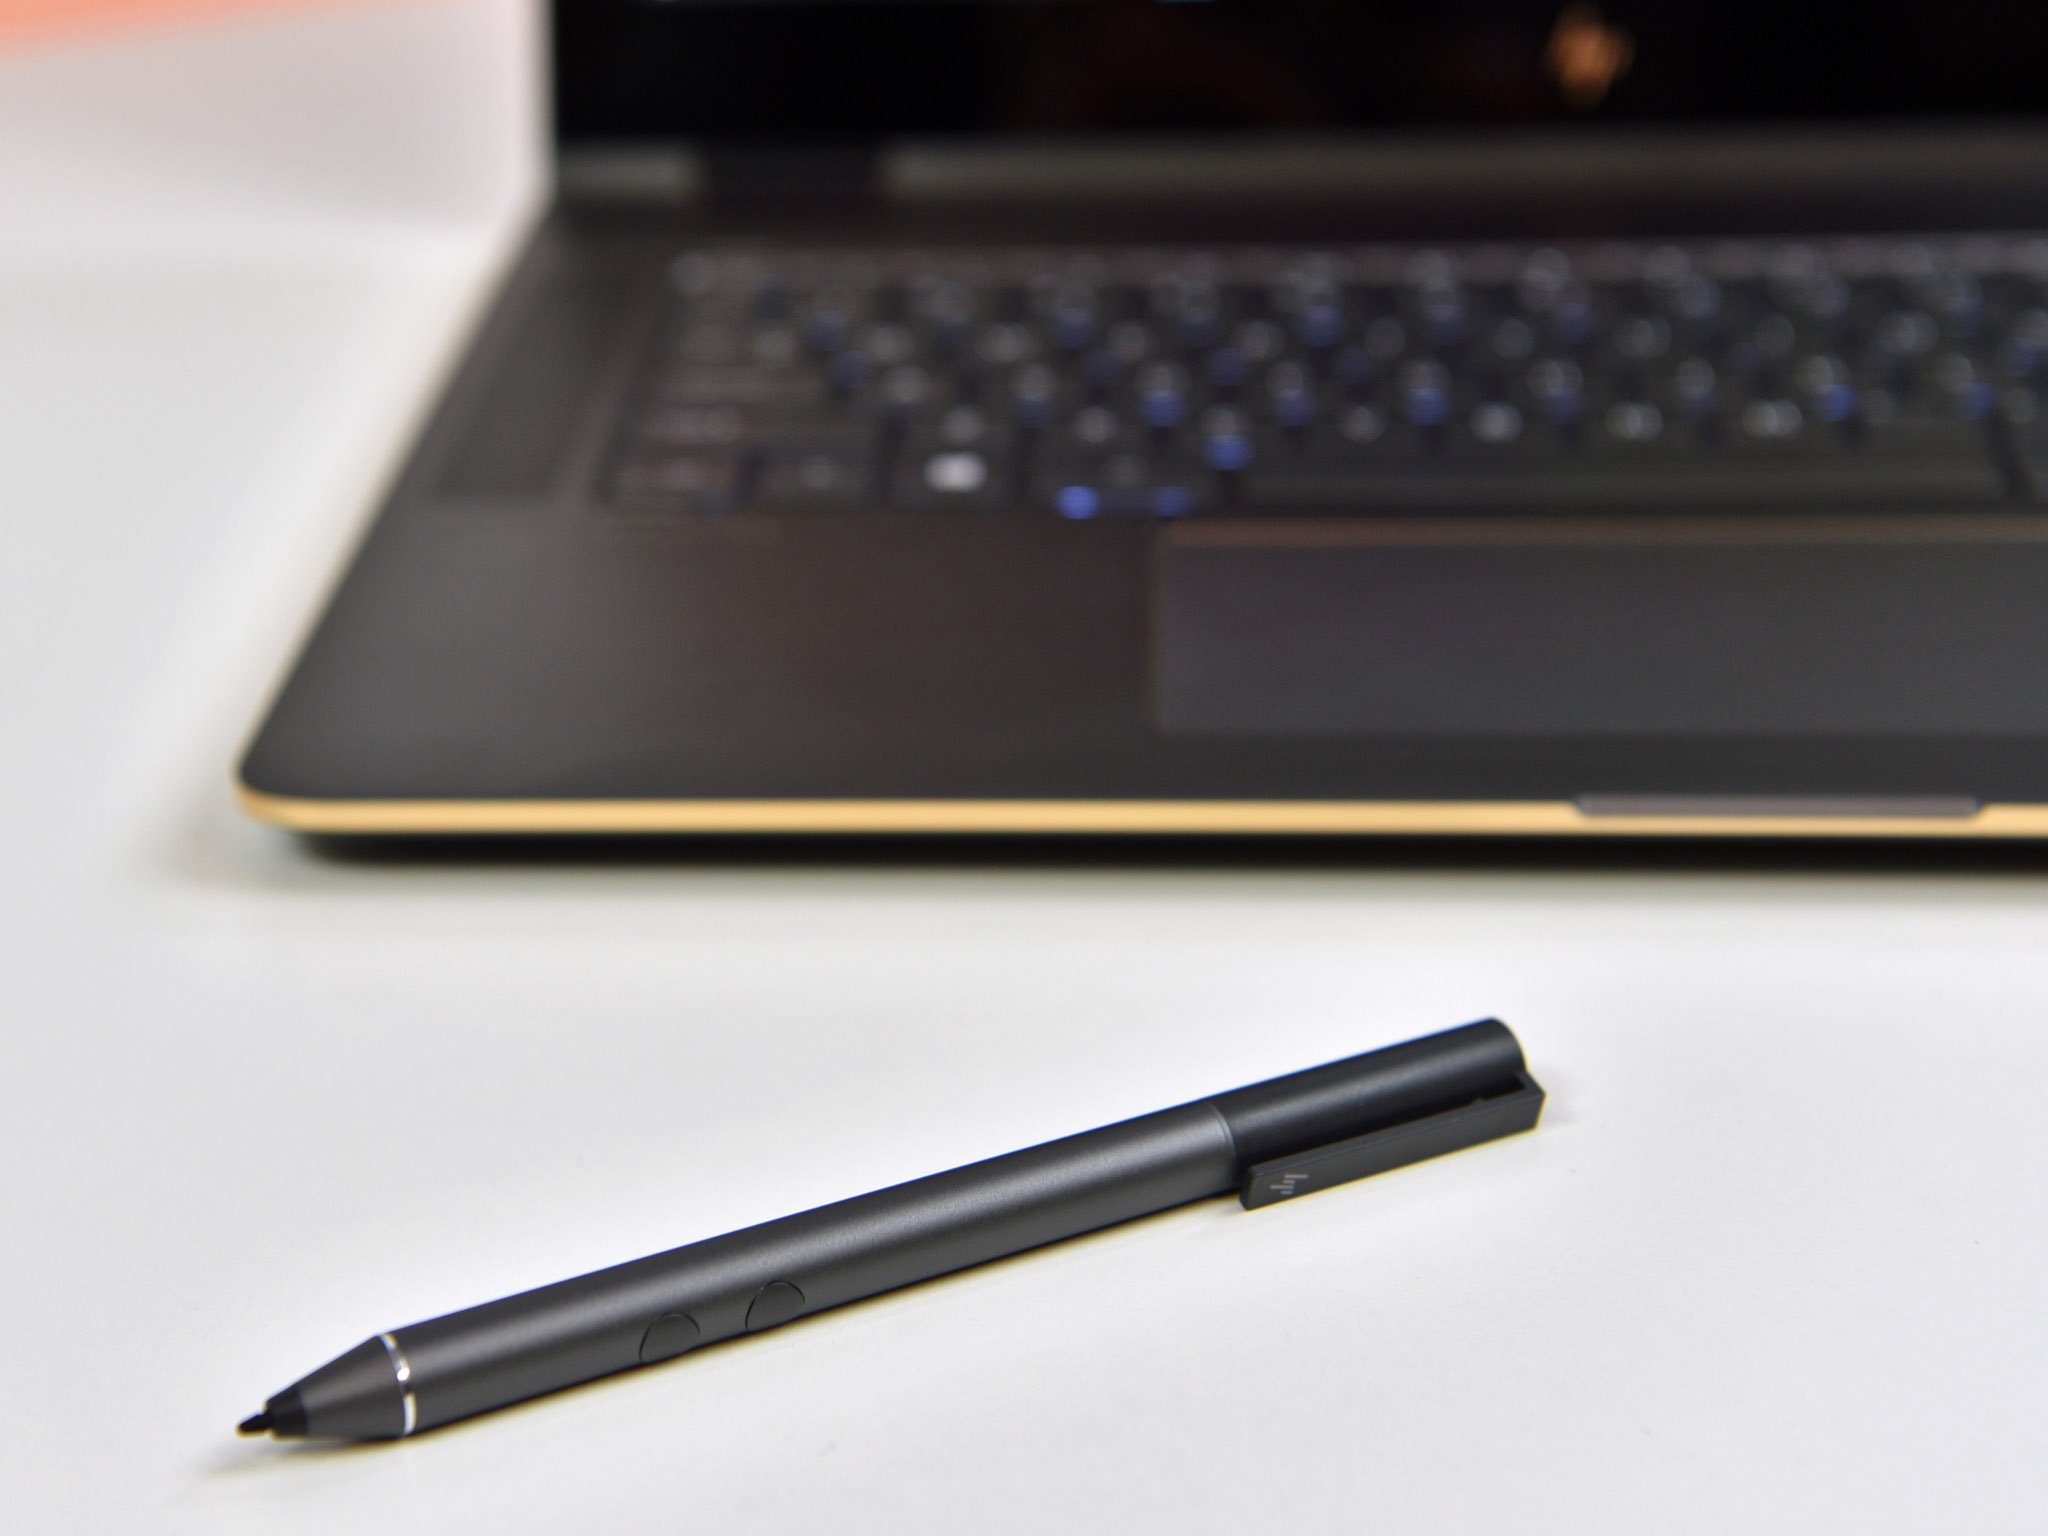 Spectre x360 color and Active Pen